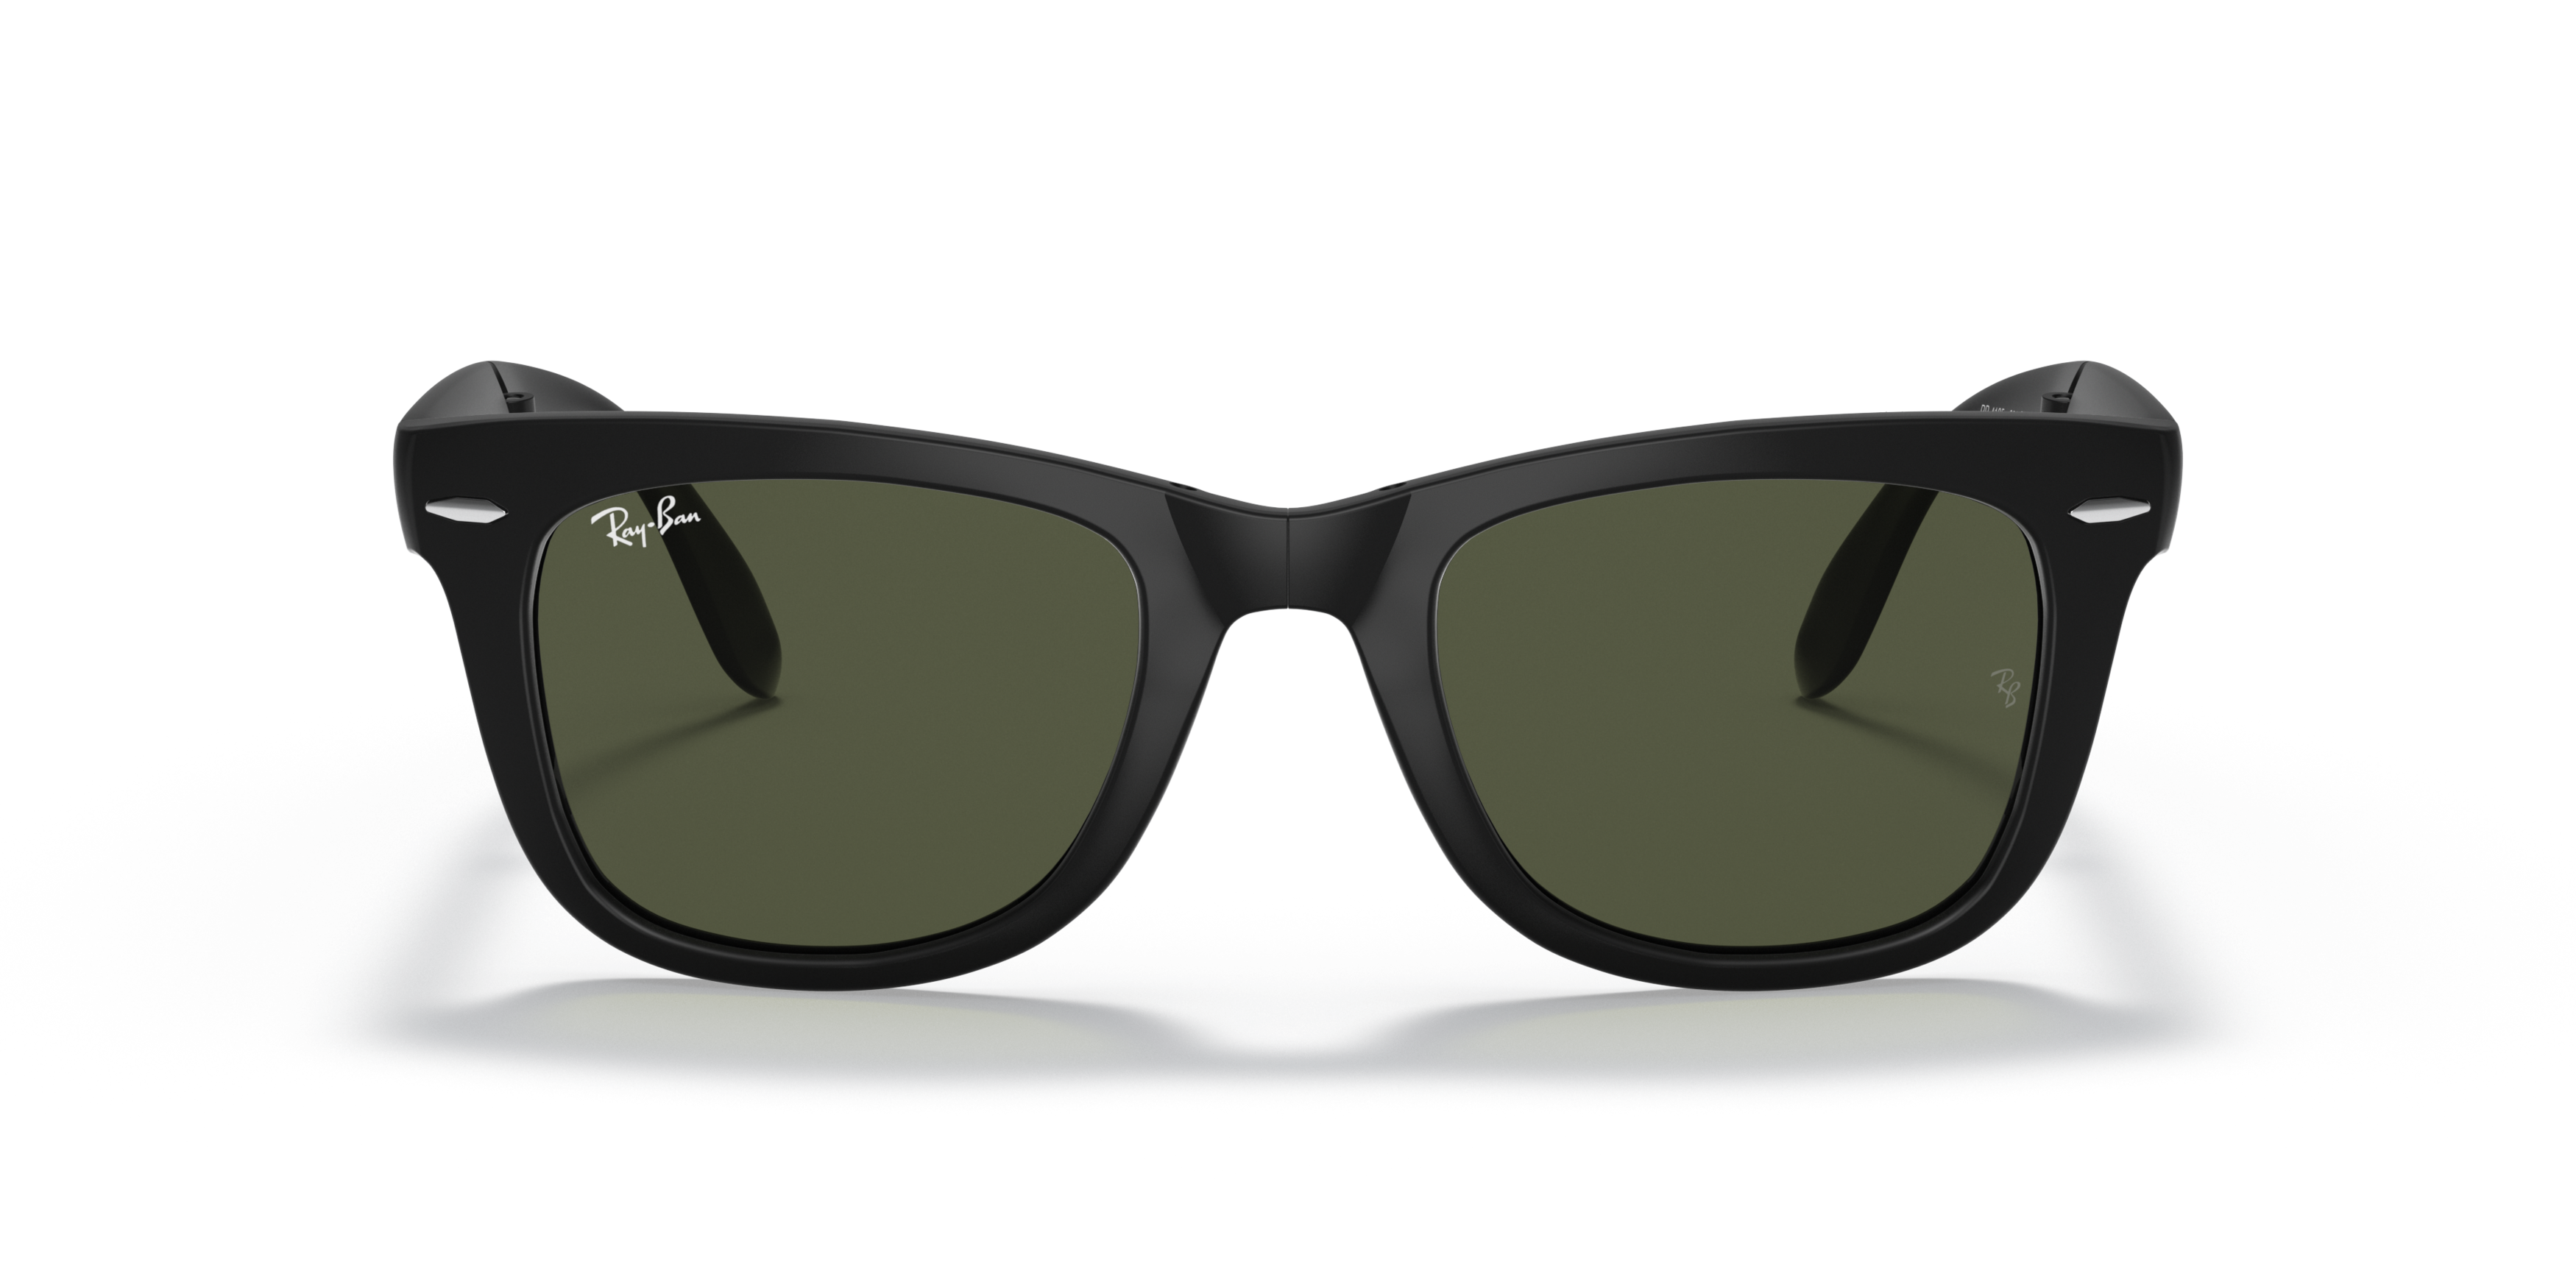 [products.image.front] Ray-Ban Wayfarer Folding Classic RB4105 601S